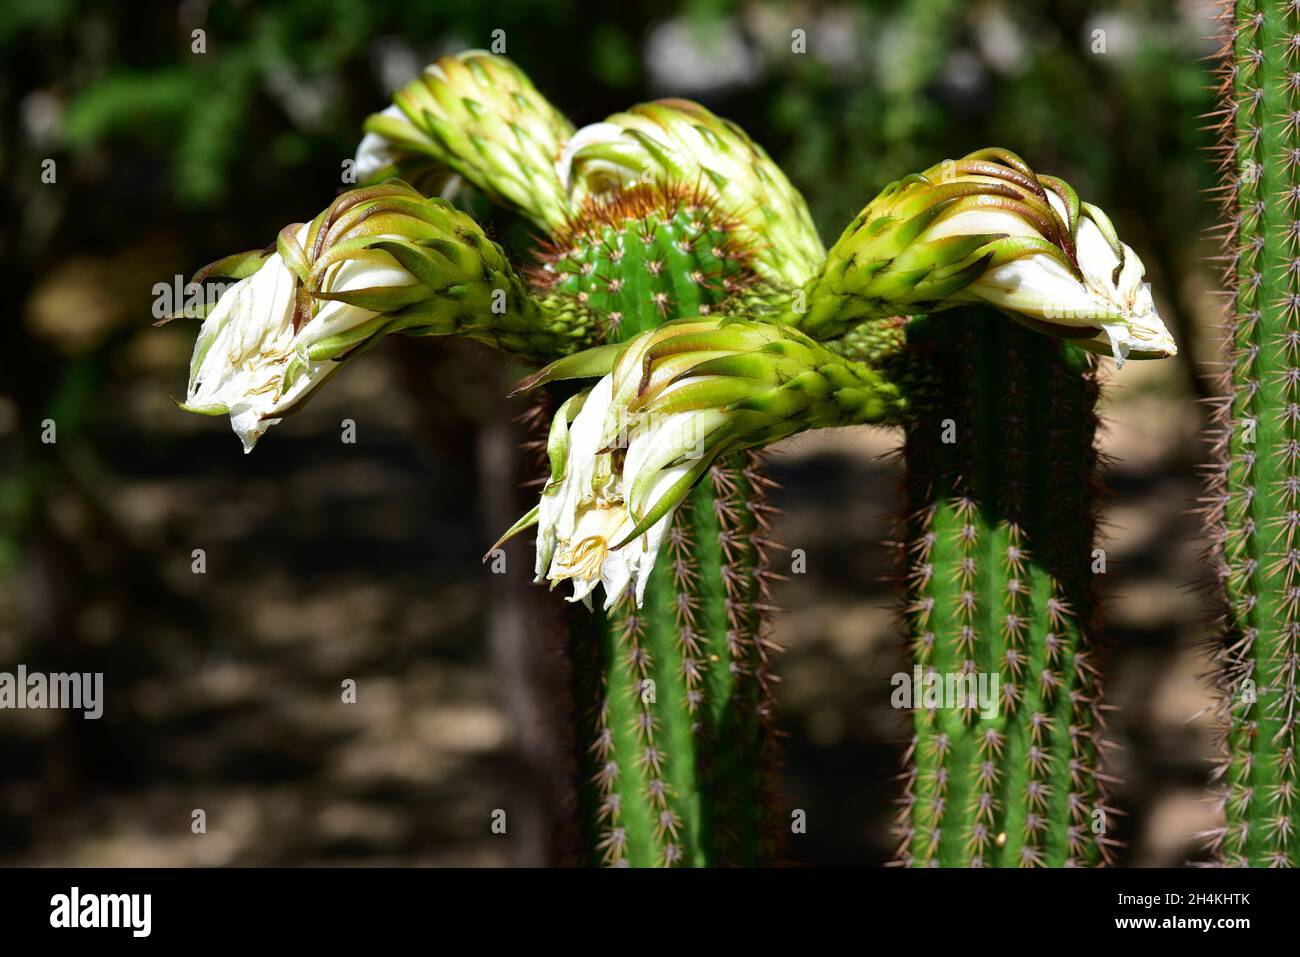 Golden torch (Echinopsis spachiana) is a cactus native to Argentina. Stock Photo